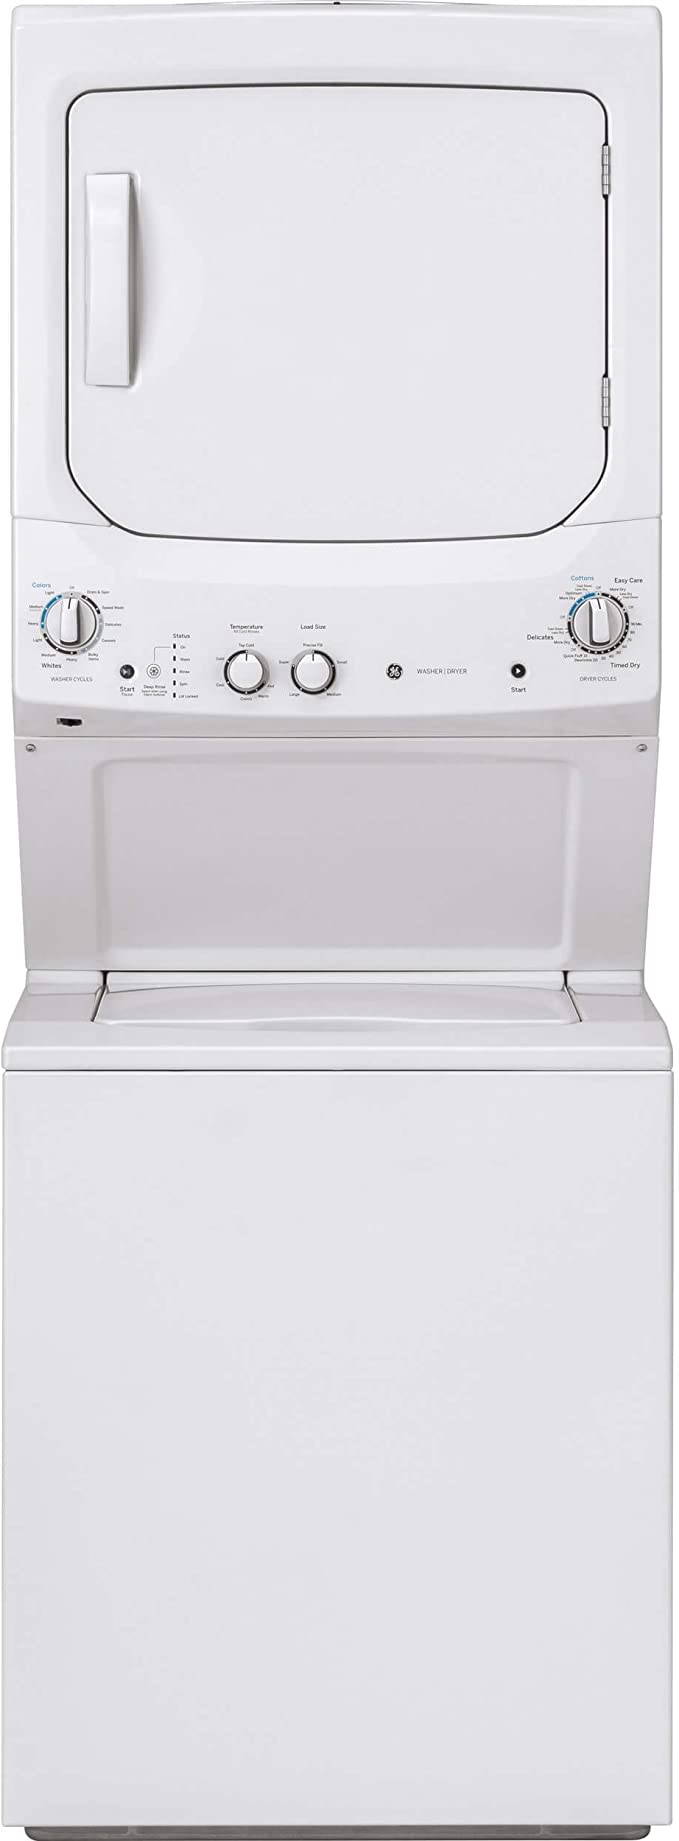 G.E. GUD27ESSMWW 27 White Electric Washer/Dryer Stacked Laundry Center